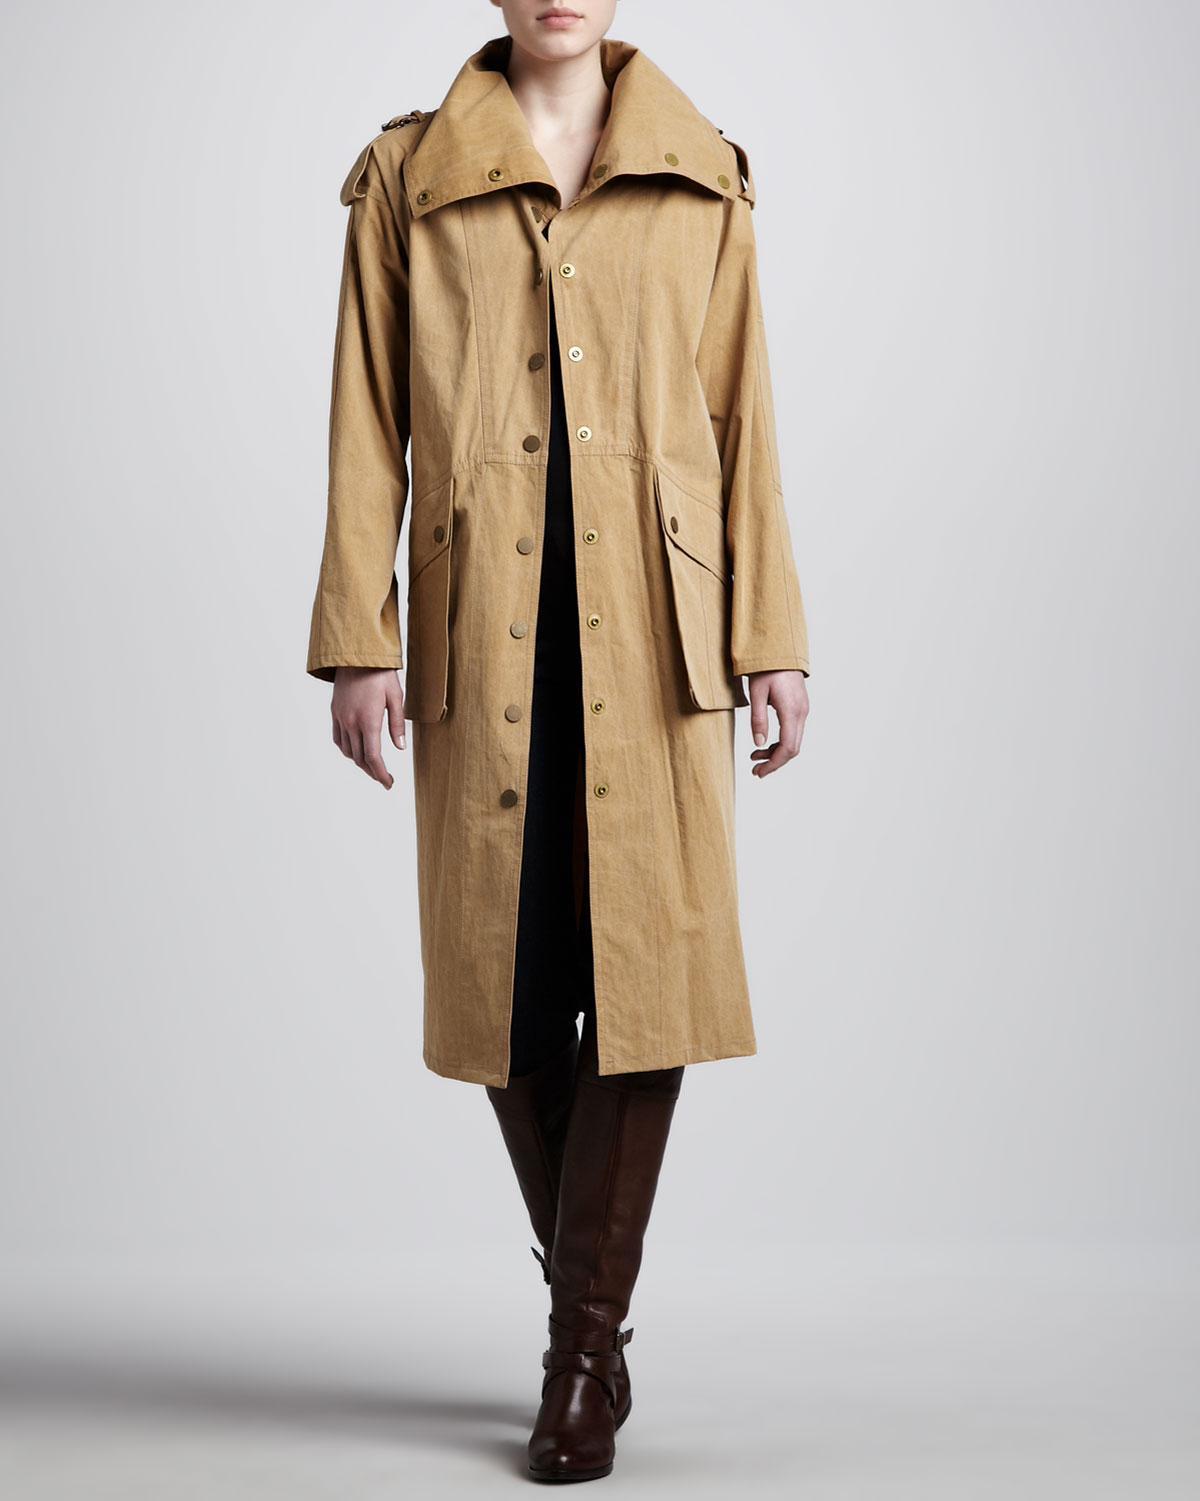 Lyst - Michael Kors Macintosh Washed Cotton Broadcloth Coat in Natural